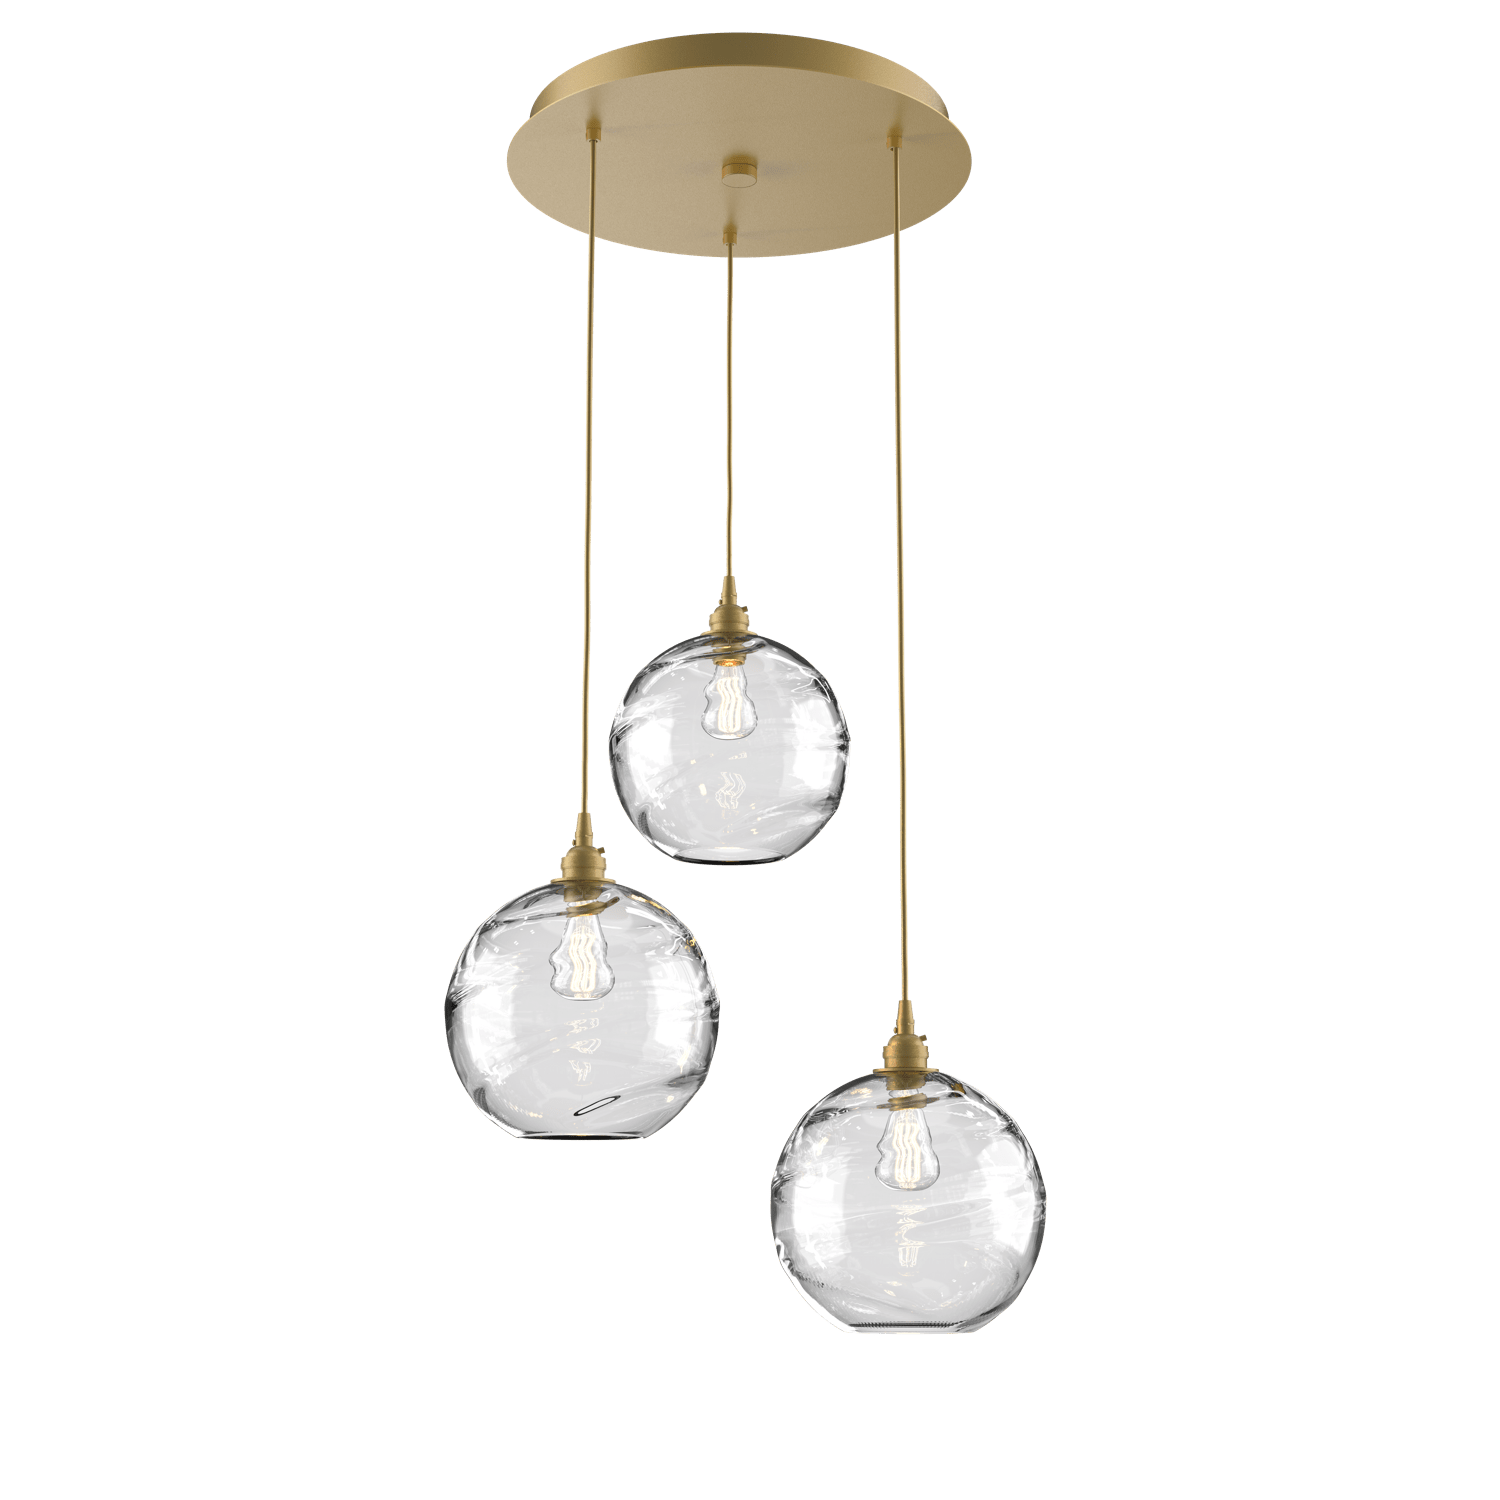 CHB0047-03-GB-OC-Hammerton-Studio-Optic-Blown-Glass-Terra-3-light-round-pendant-chandelier-with-gilded-brass-finish-and-optic-clear-blown-glass-shades-and-incandescent-lamping